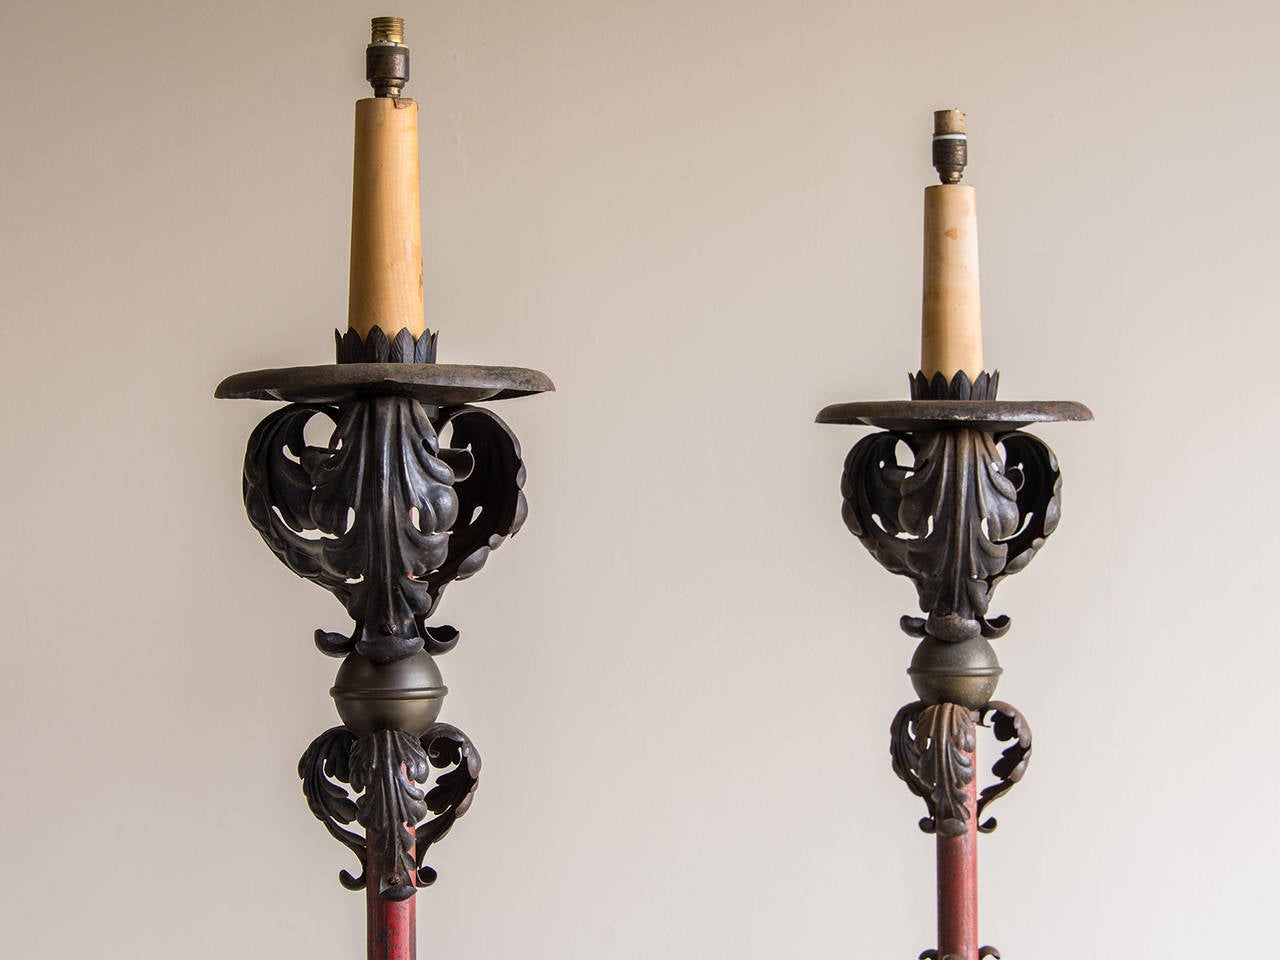 Gilt Set Four Massive Antique French Iron Candle Stands, Painted & Gilded, circa 1880